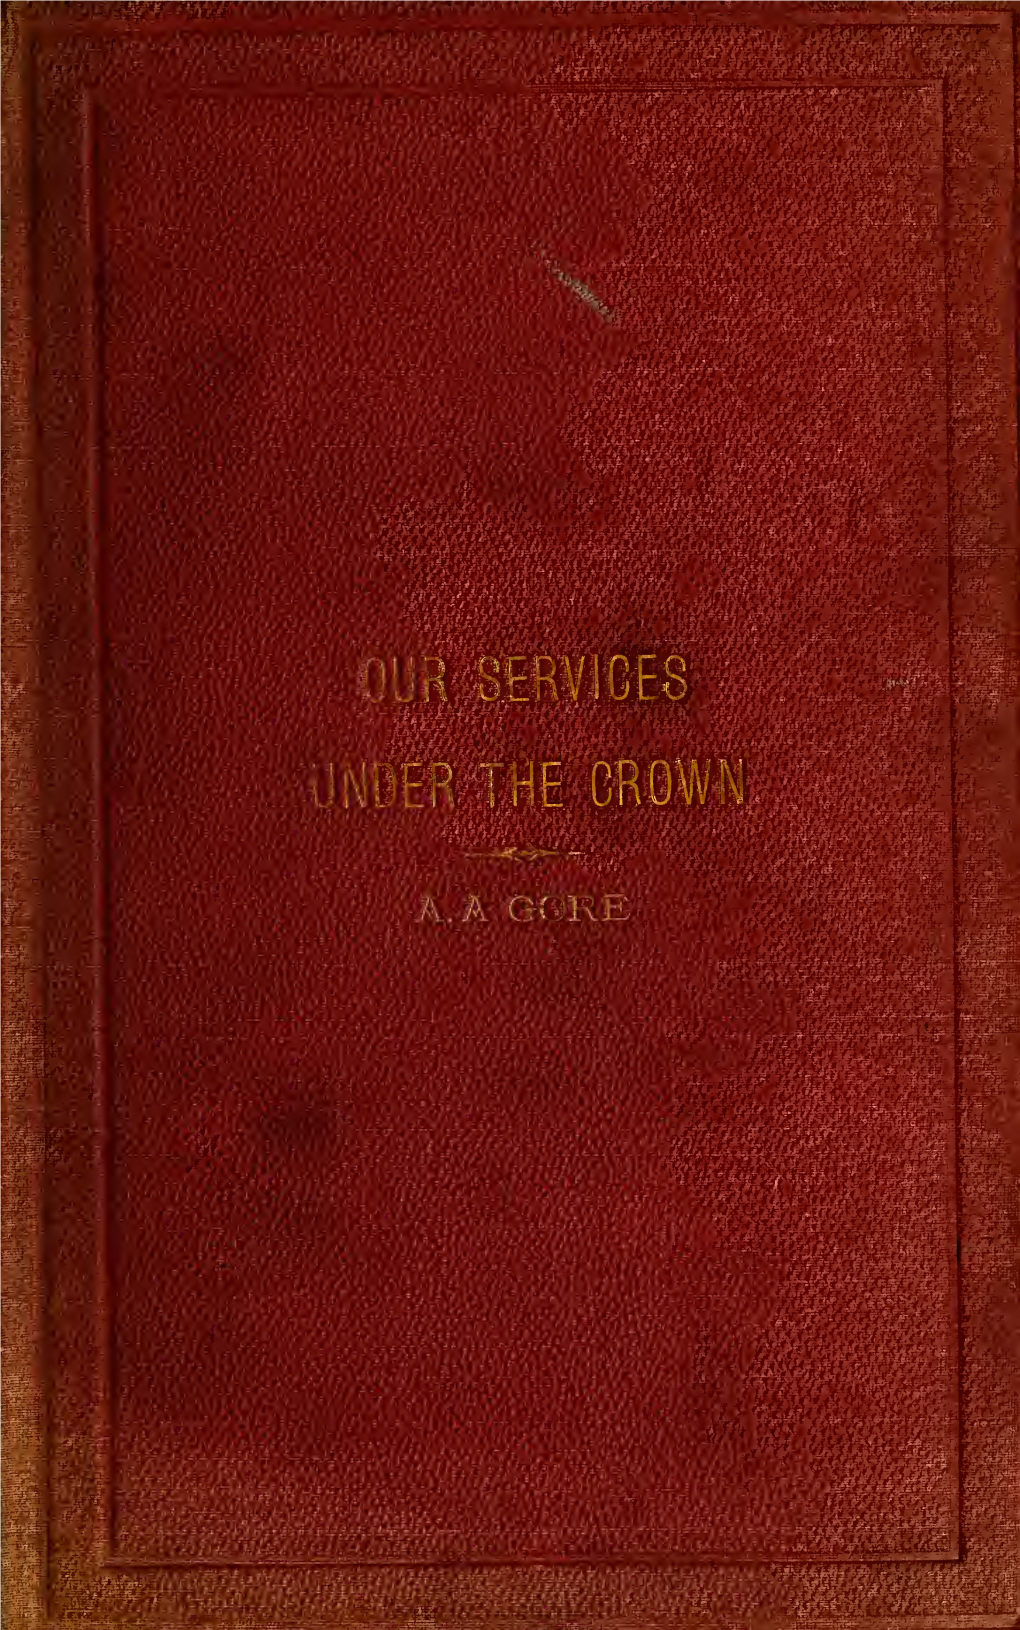 The Story of Our Services Under the Crown : a Historical Sketch of The